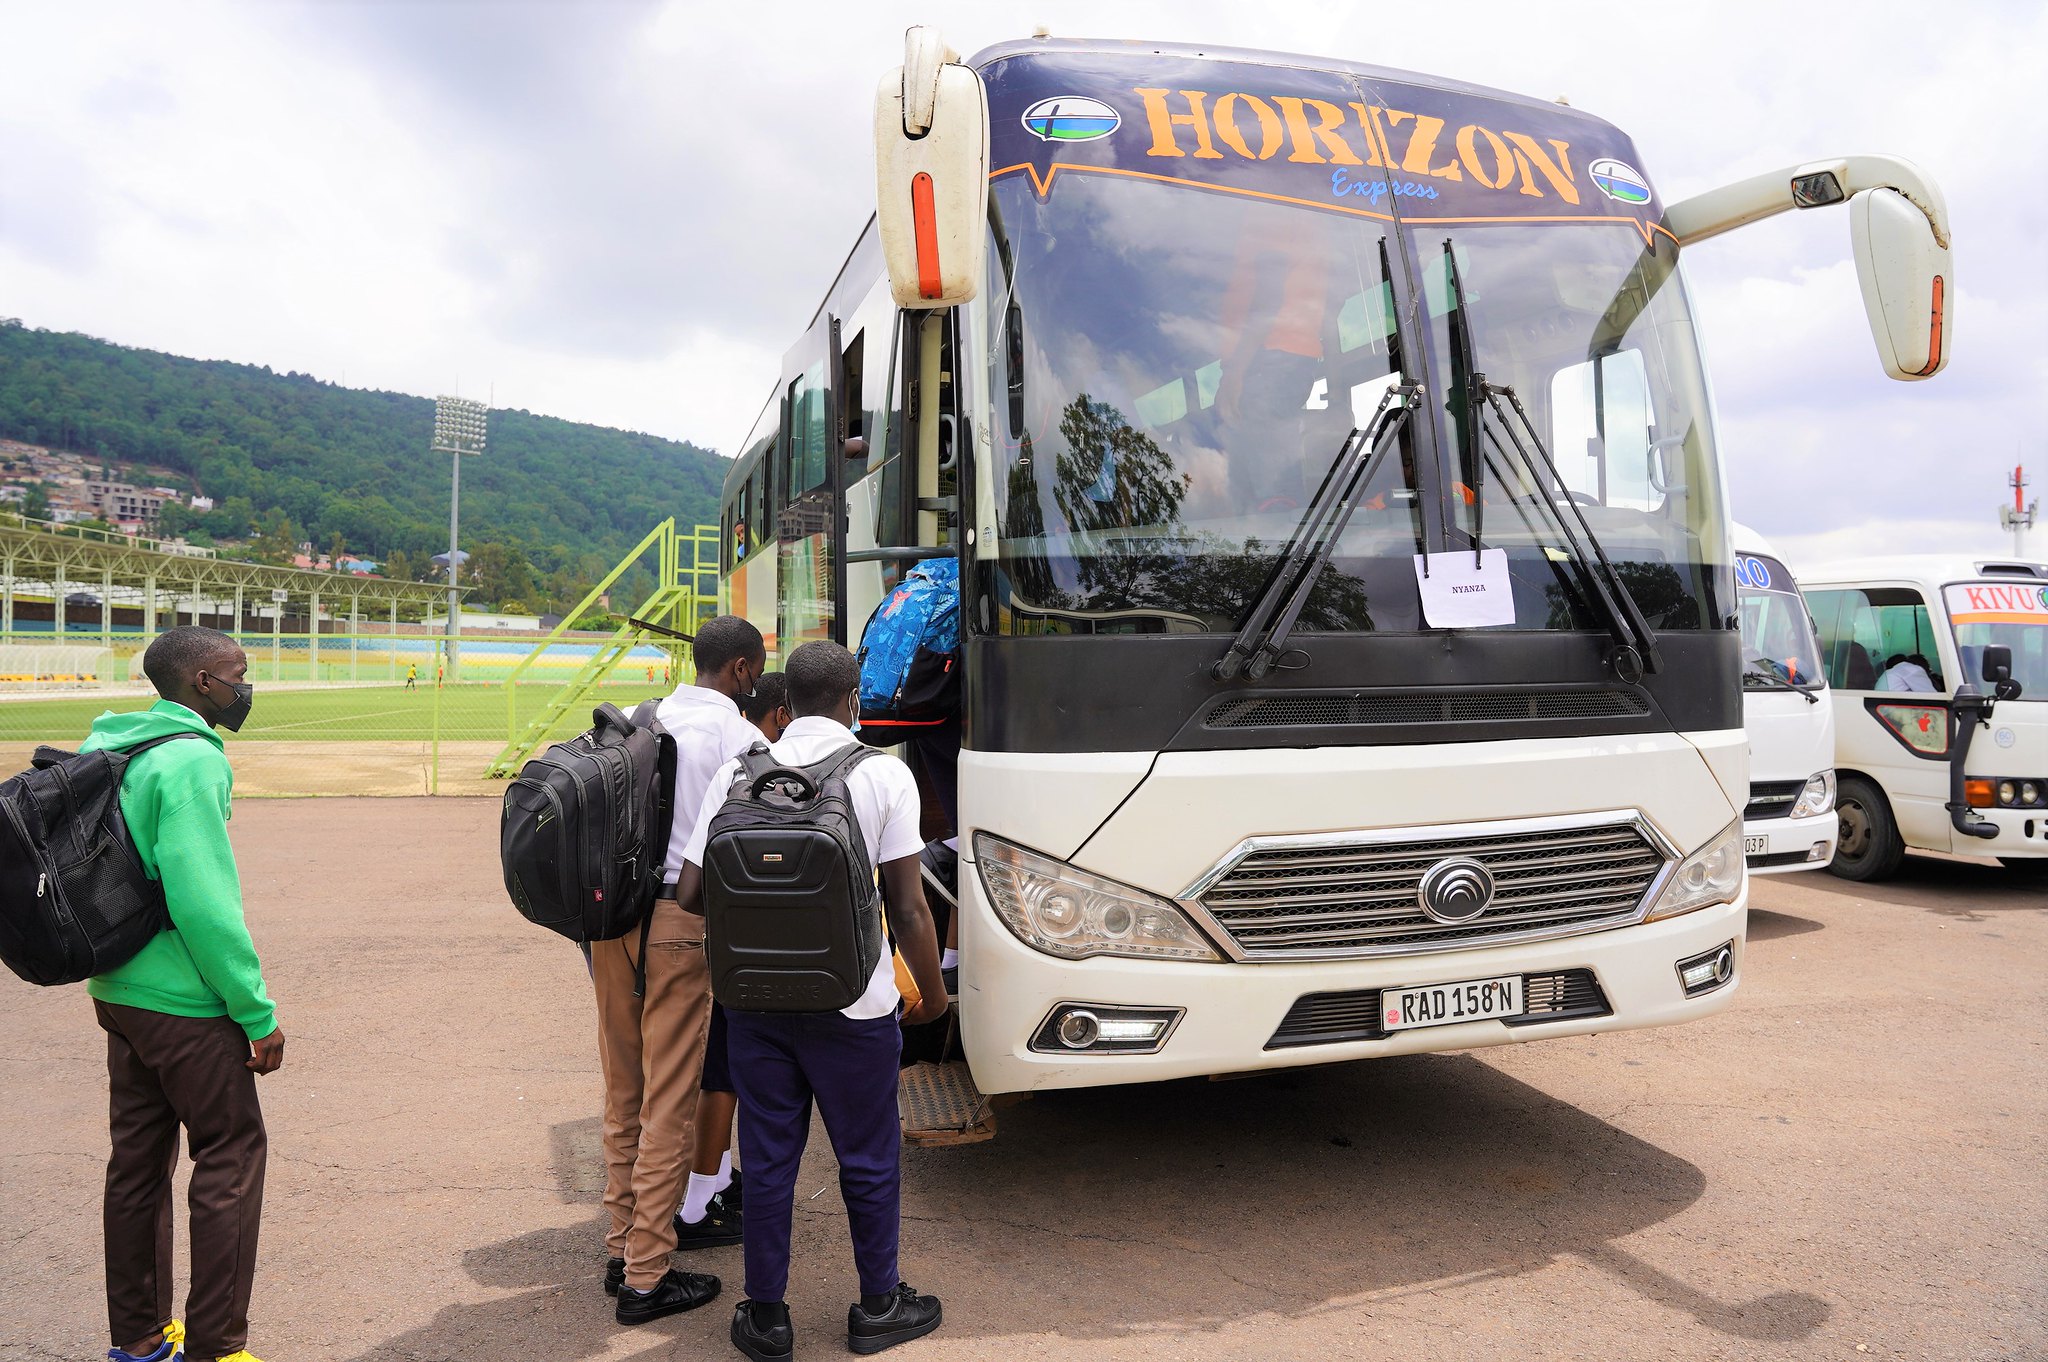 Students board a bus they go back to school for the third term at Kigali Stadium on April 18